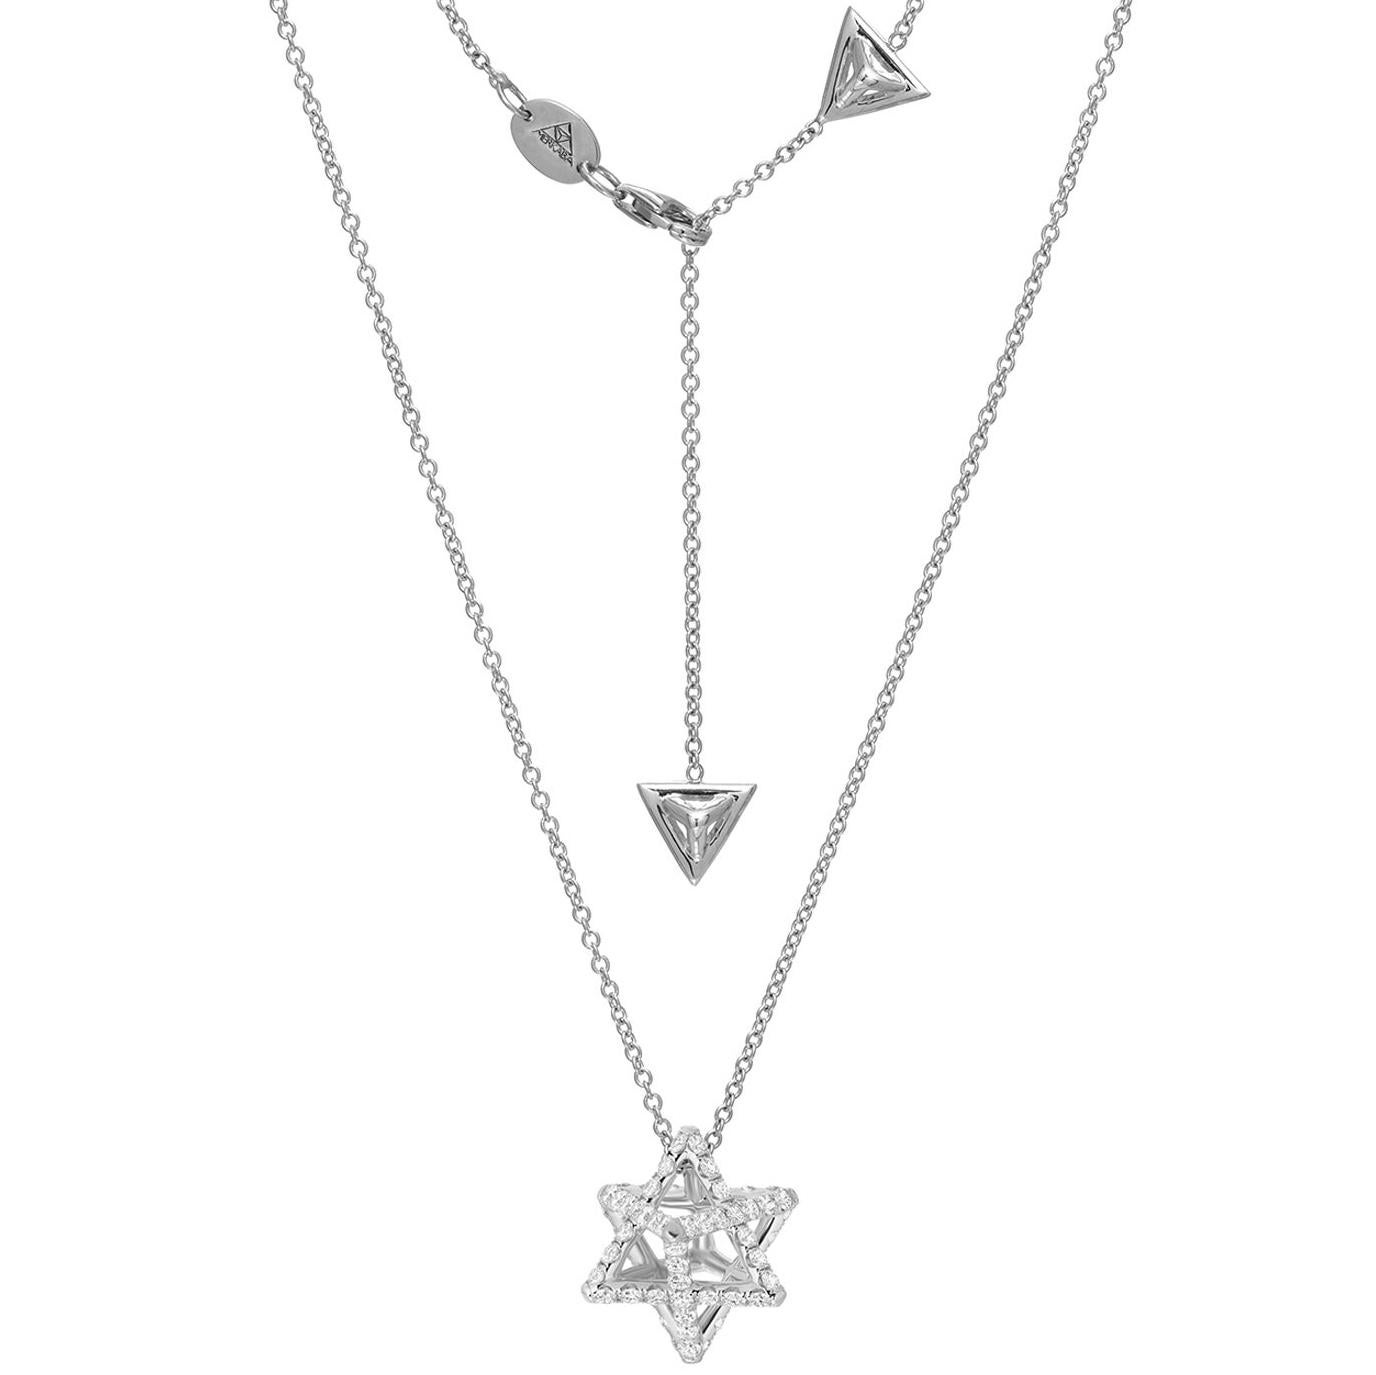 Merkaba star tetrahedron platinum diamond pendant necklace, featuring a total of approximately 1.12 carats of round brilliant diamonds, F-G color and VVS2-VS1 clarity. This heirloom-quality pendant suspends elegantly at the chest, measuring 0.68”, a